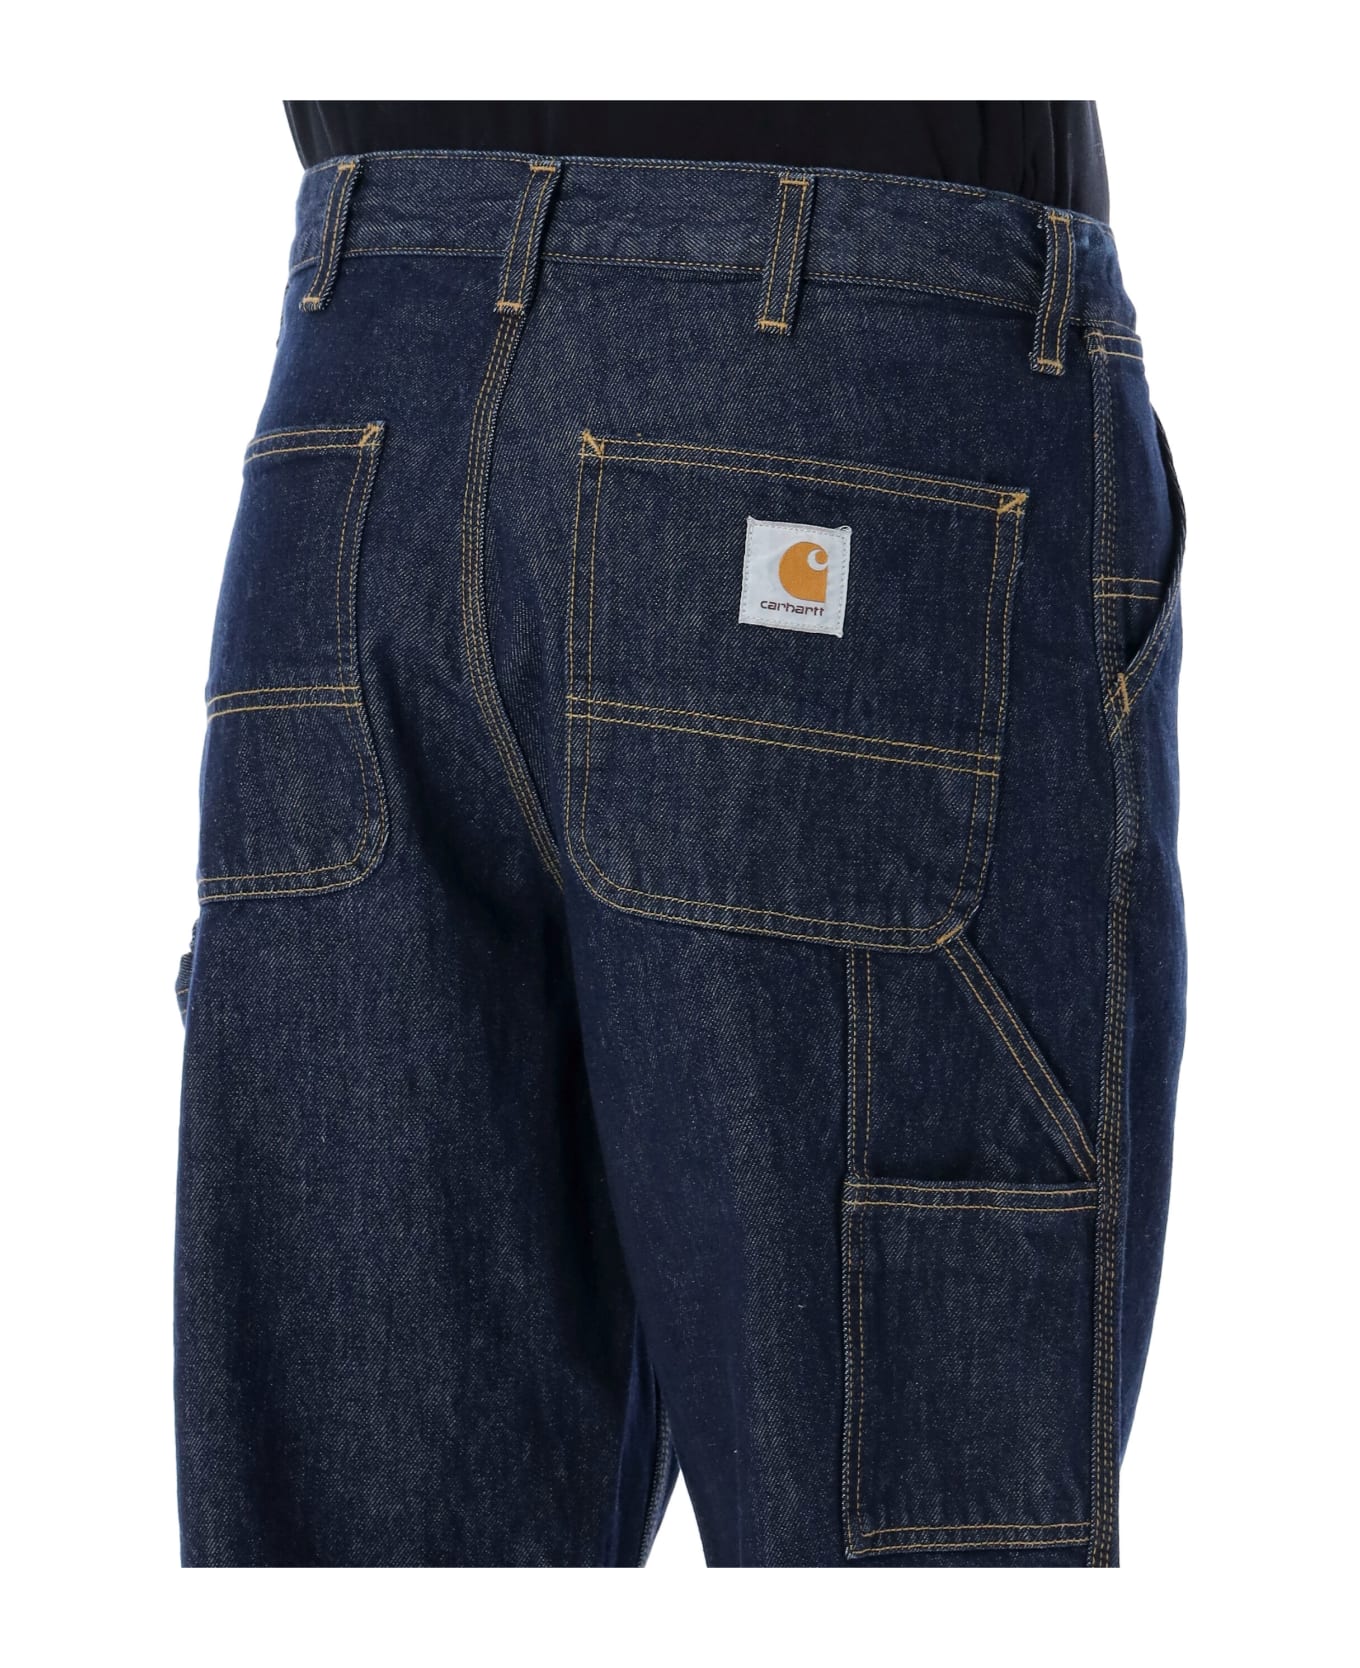 Carhartt Single Knee Jeans - BLUE STONE BLITCHED